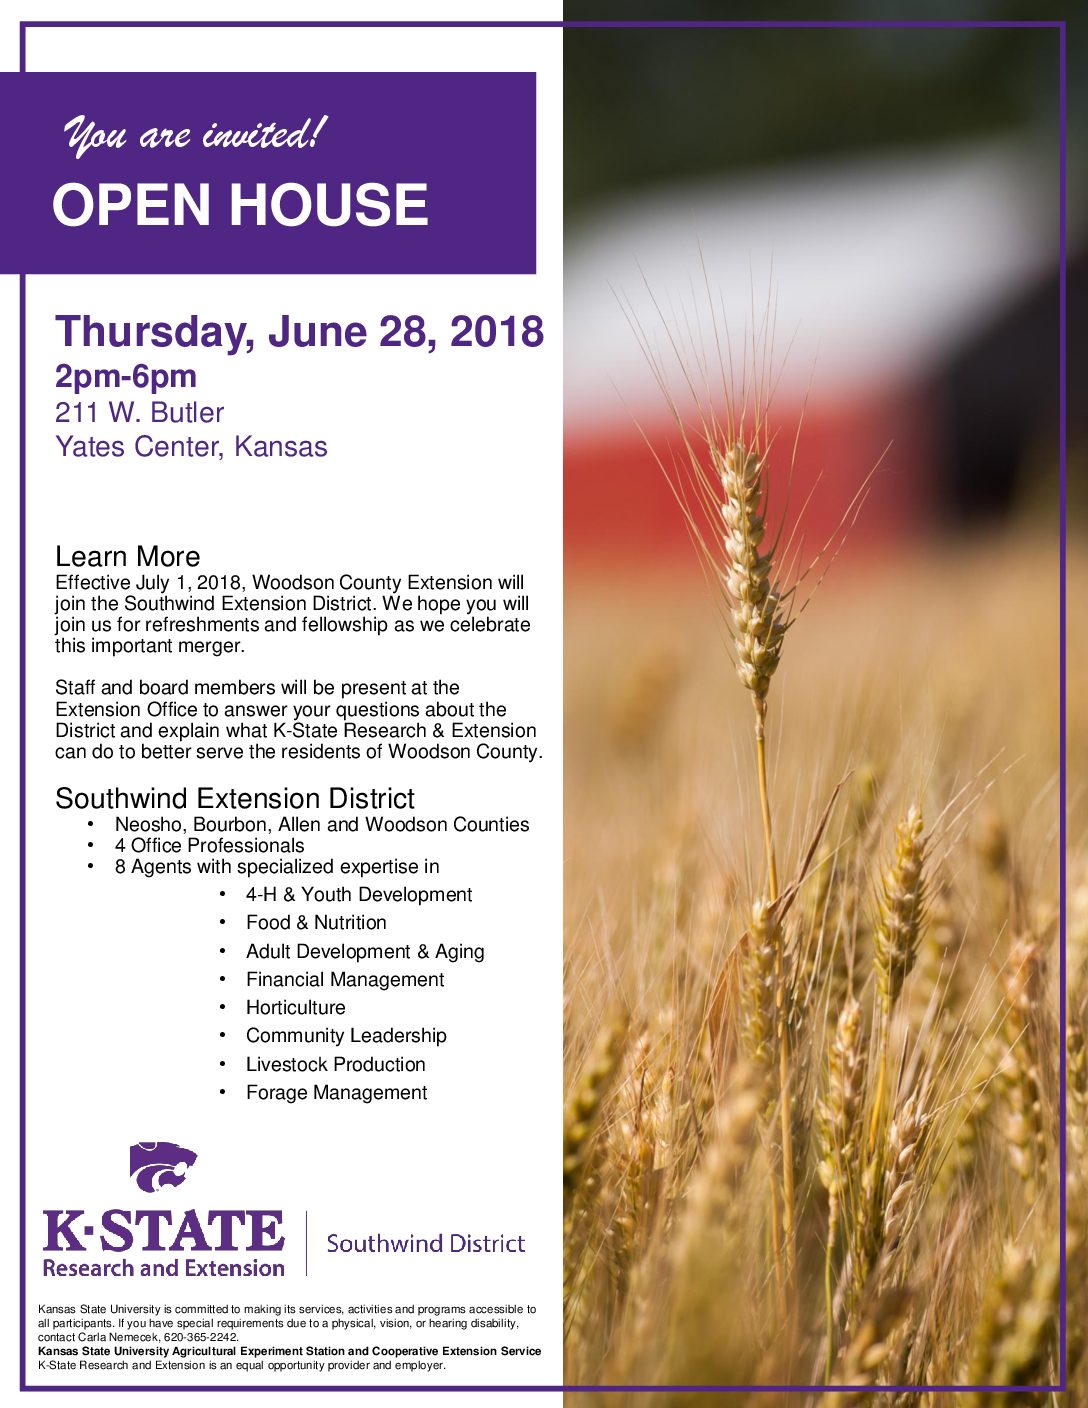 Open House for Woodson County Extension